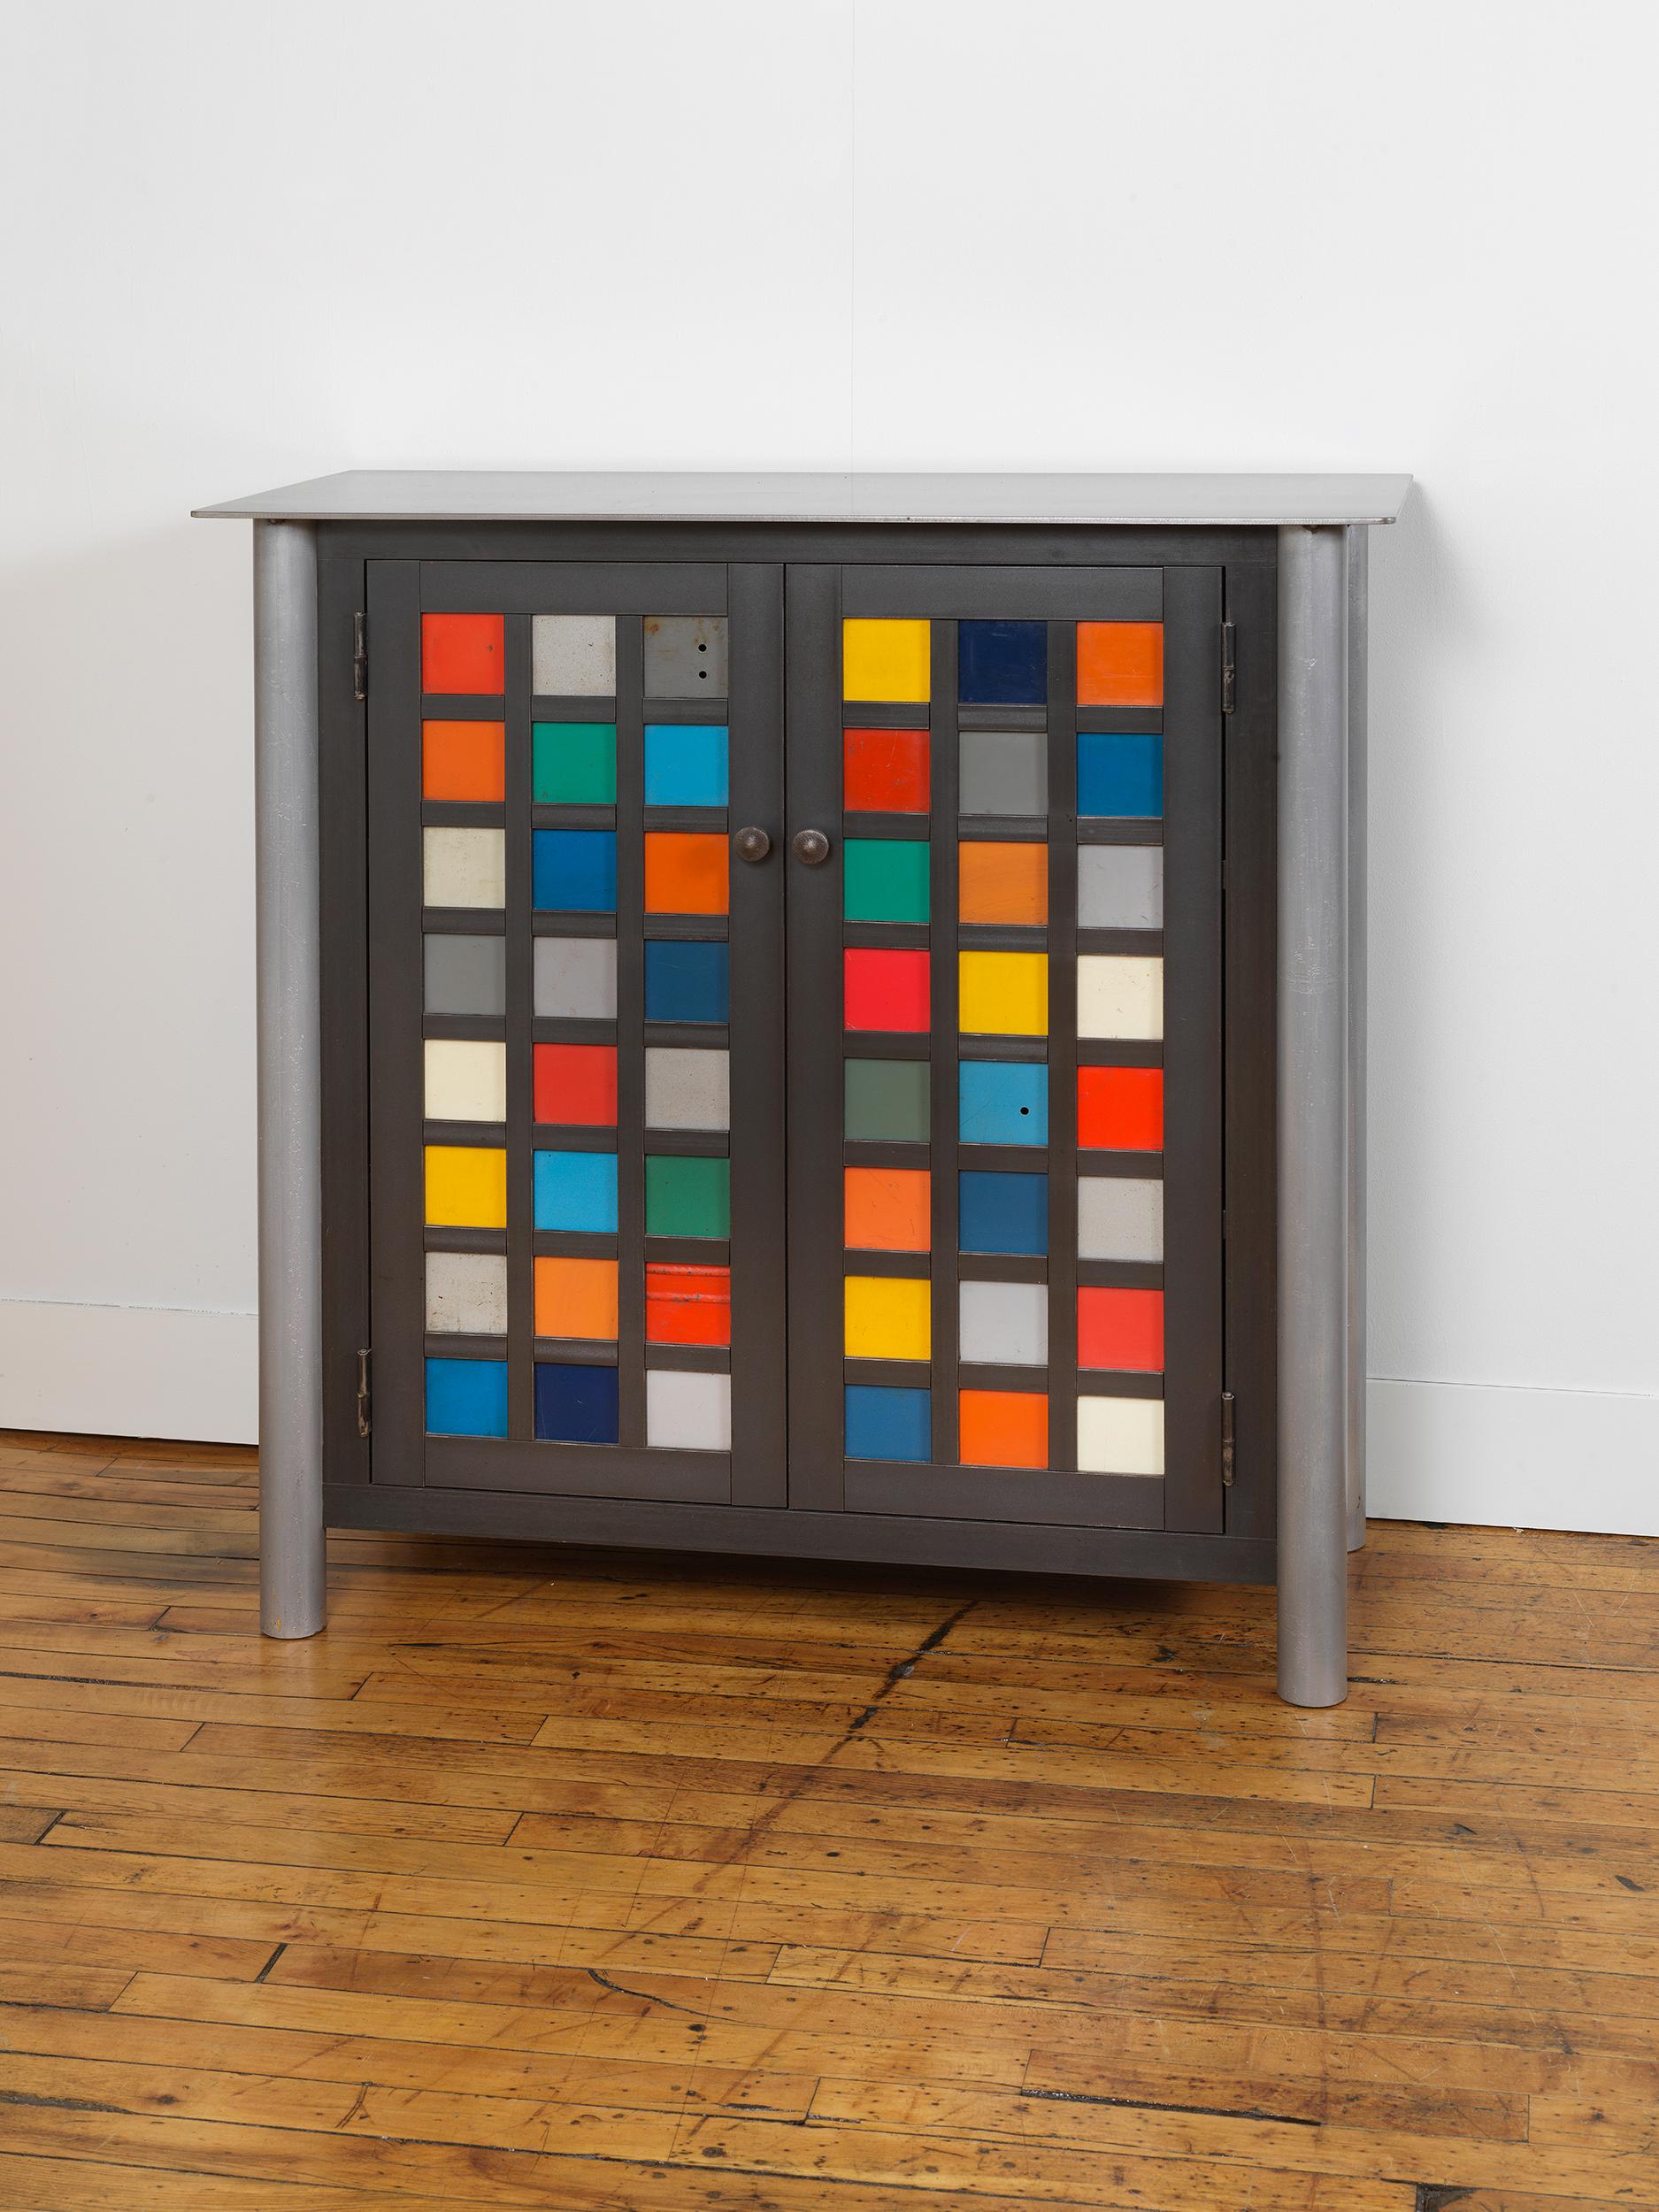 This totally functional cabinet with two interior shelves is created from hot-rolled steel and found painted panels. The panels on the door fronts and sides are created from blocks of painted salvaged and recycled steel. This unique custom piece is